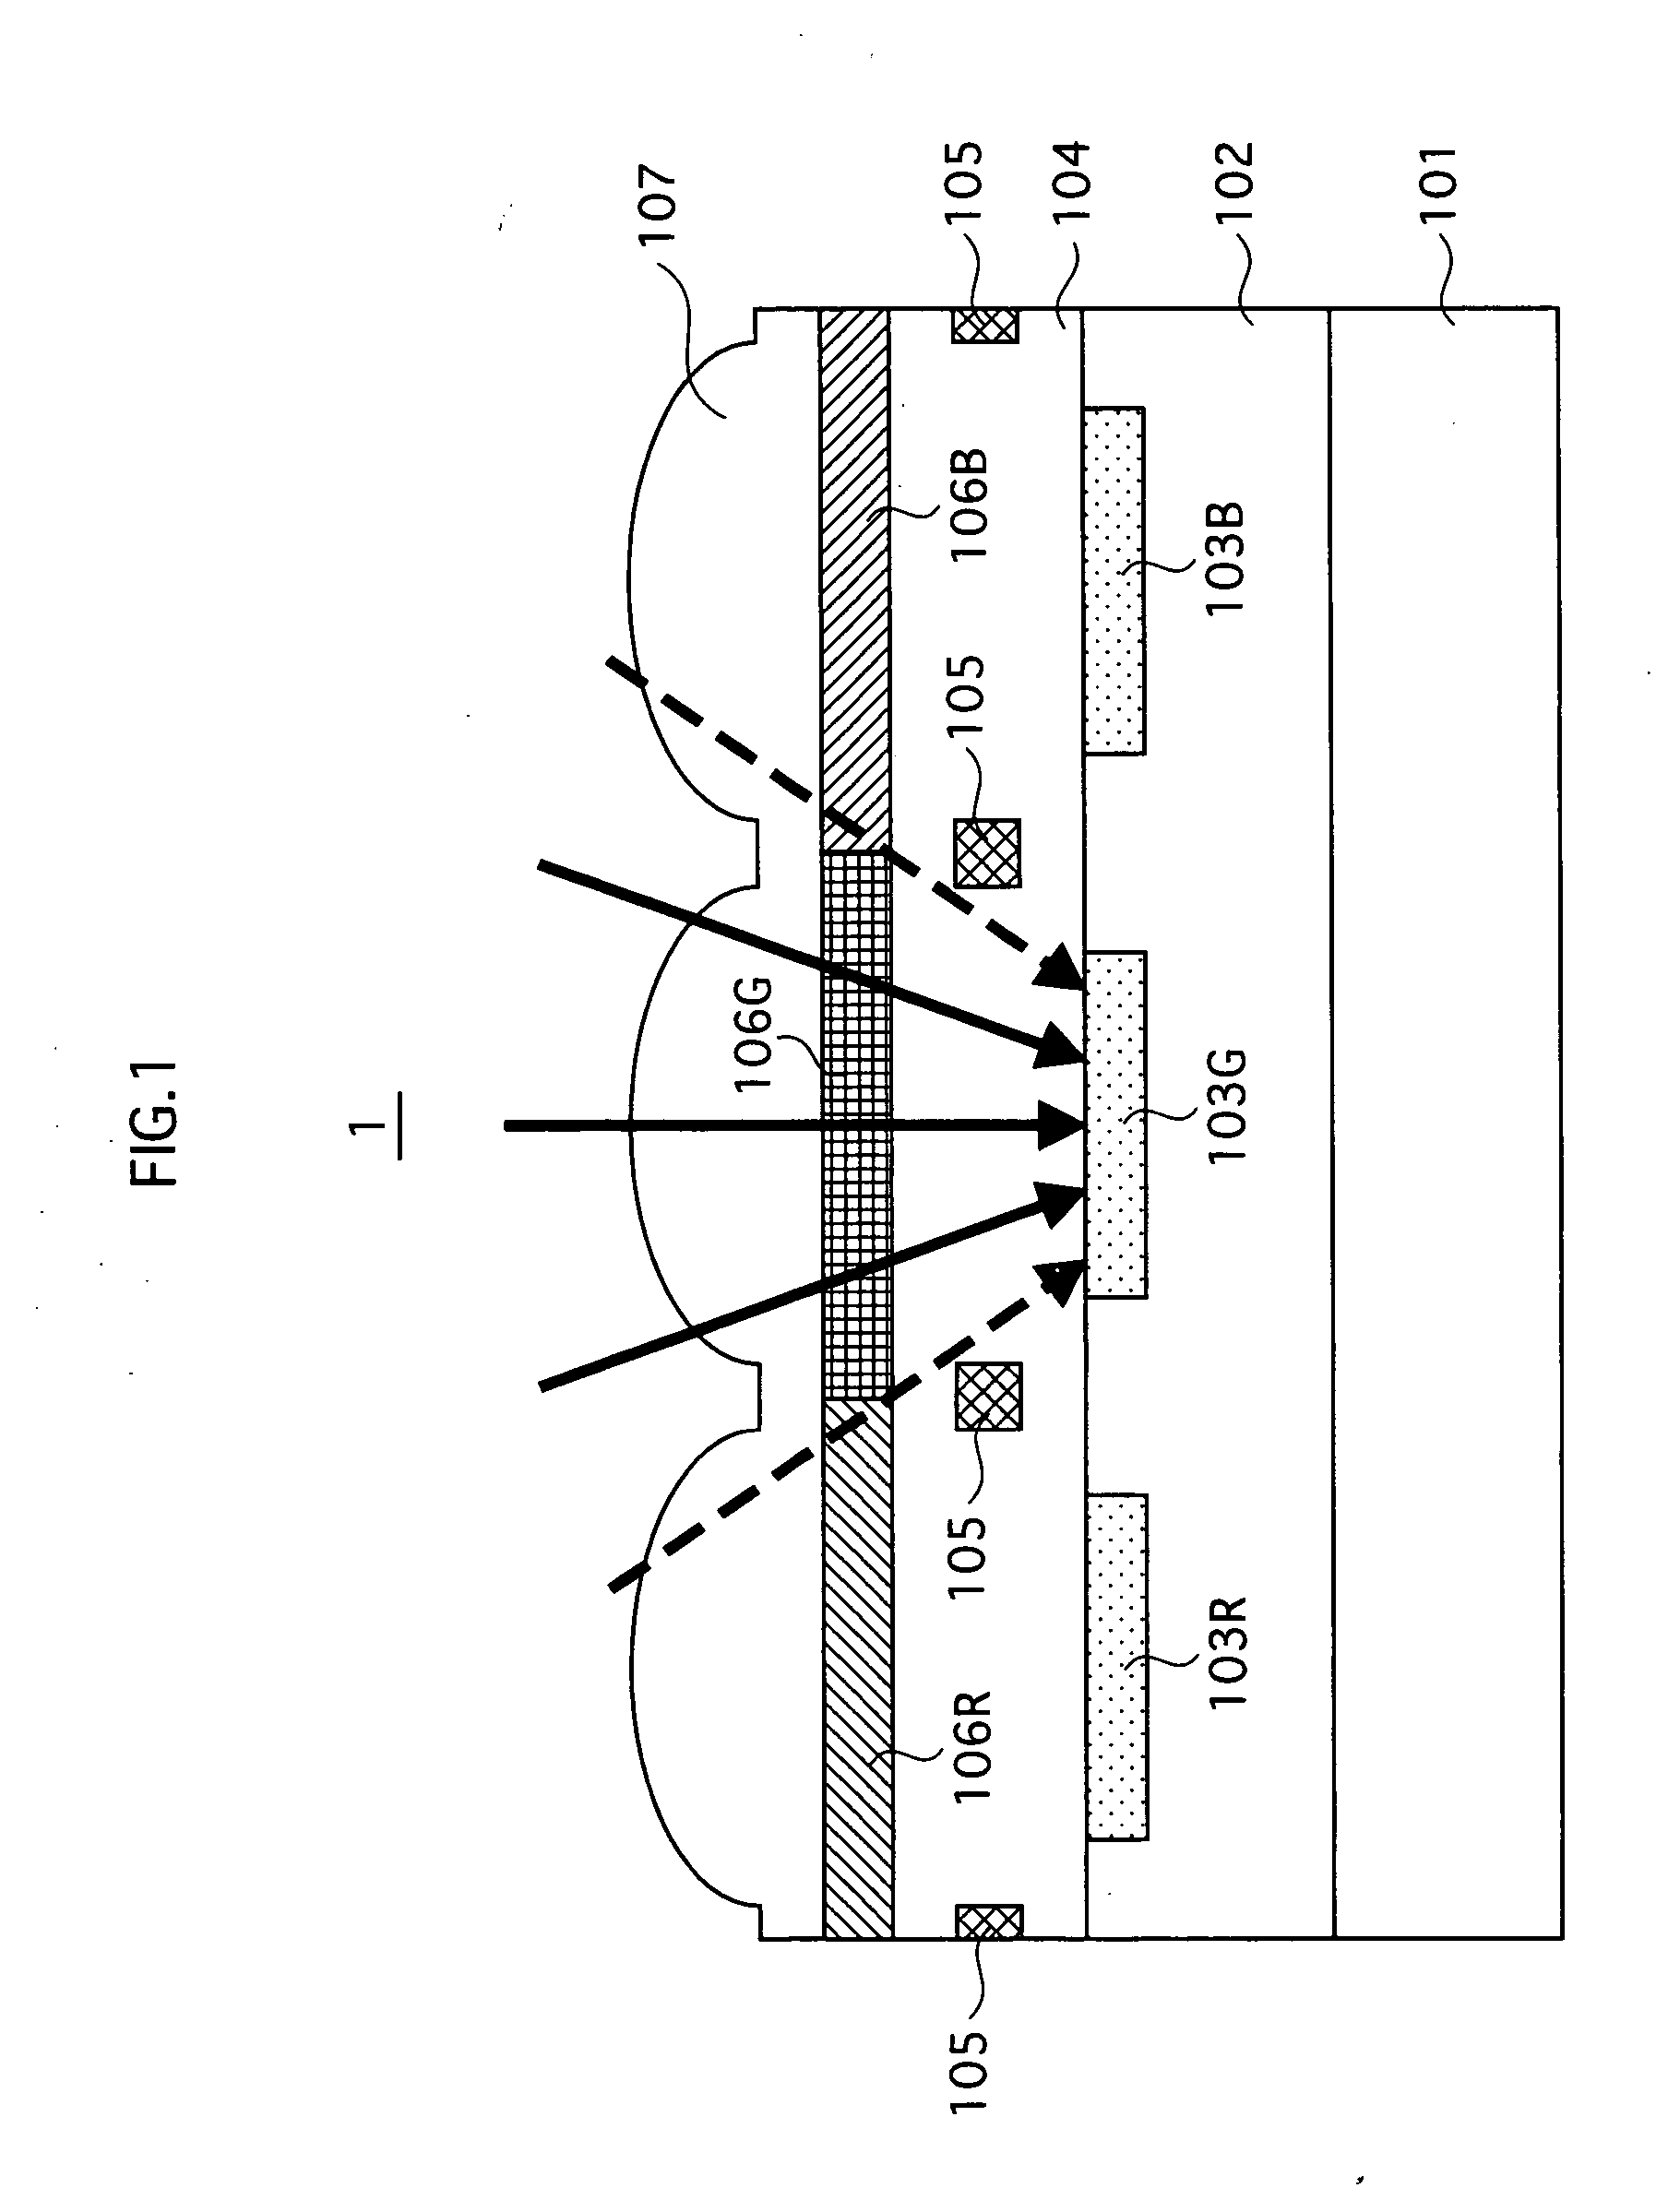 Solid-state imaging device, manufacturing method of solid-state imaging device, and camera employing same